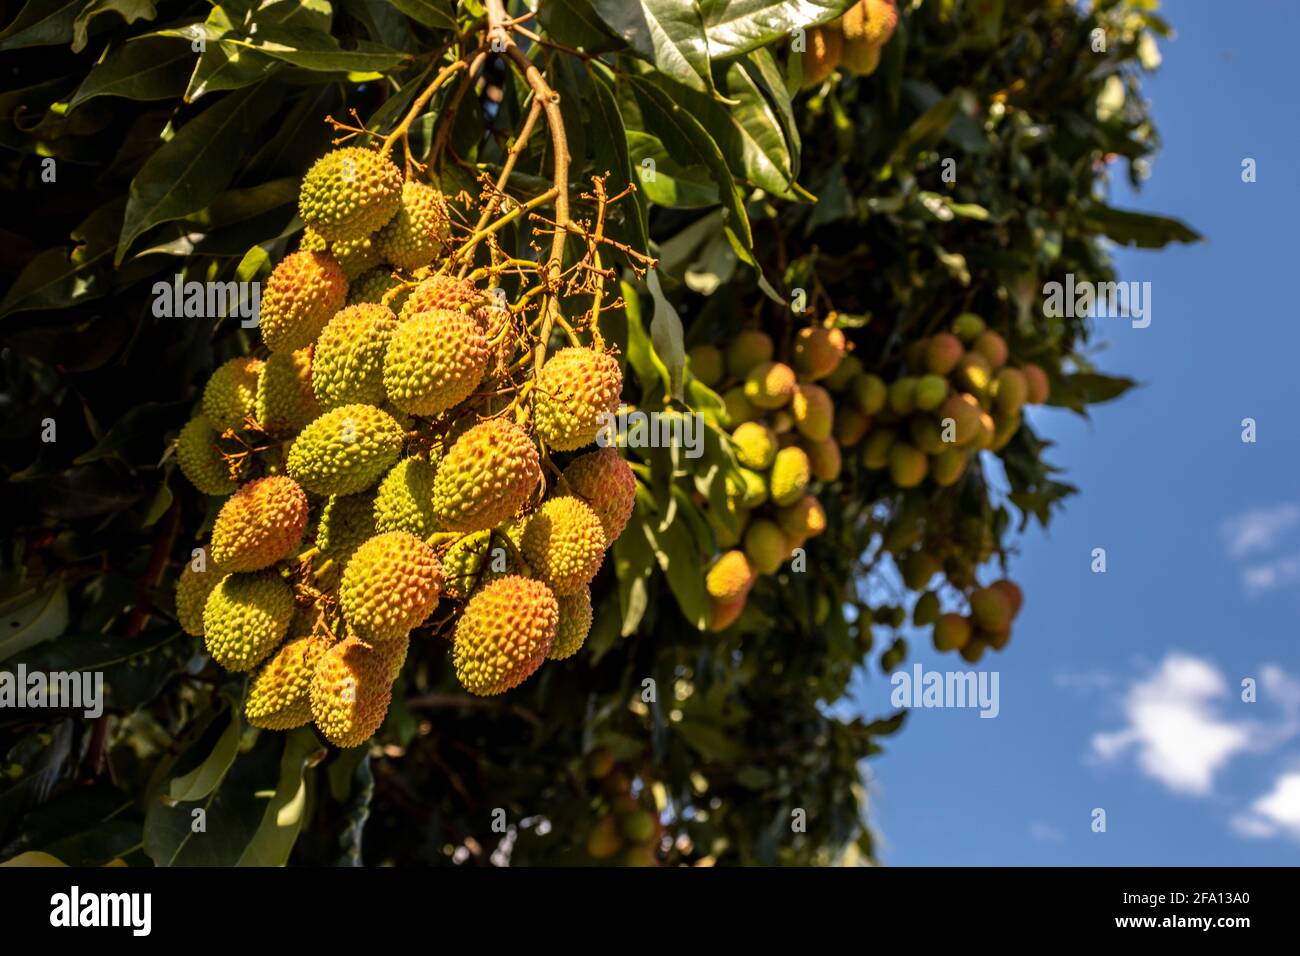 Unripe green lychee hanging from a lychee tree. Fresh green lychee fruits grow on tree in Brazil Stock Photo